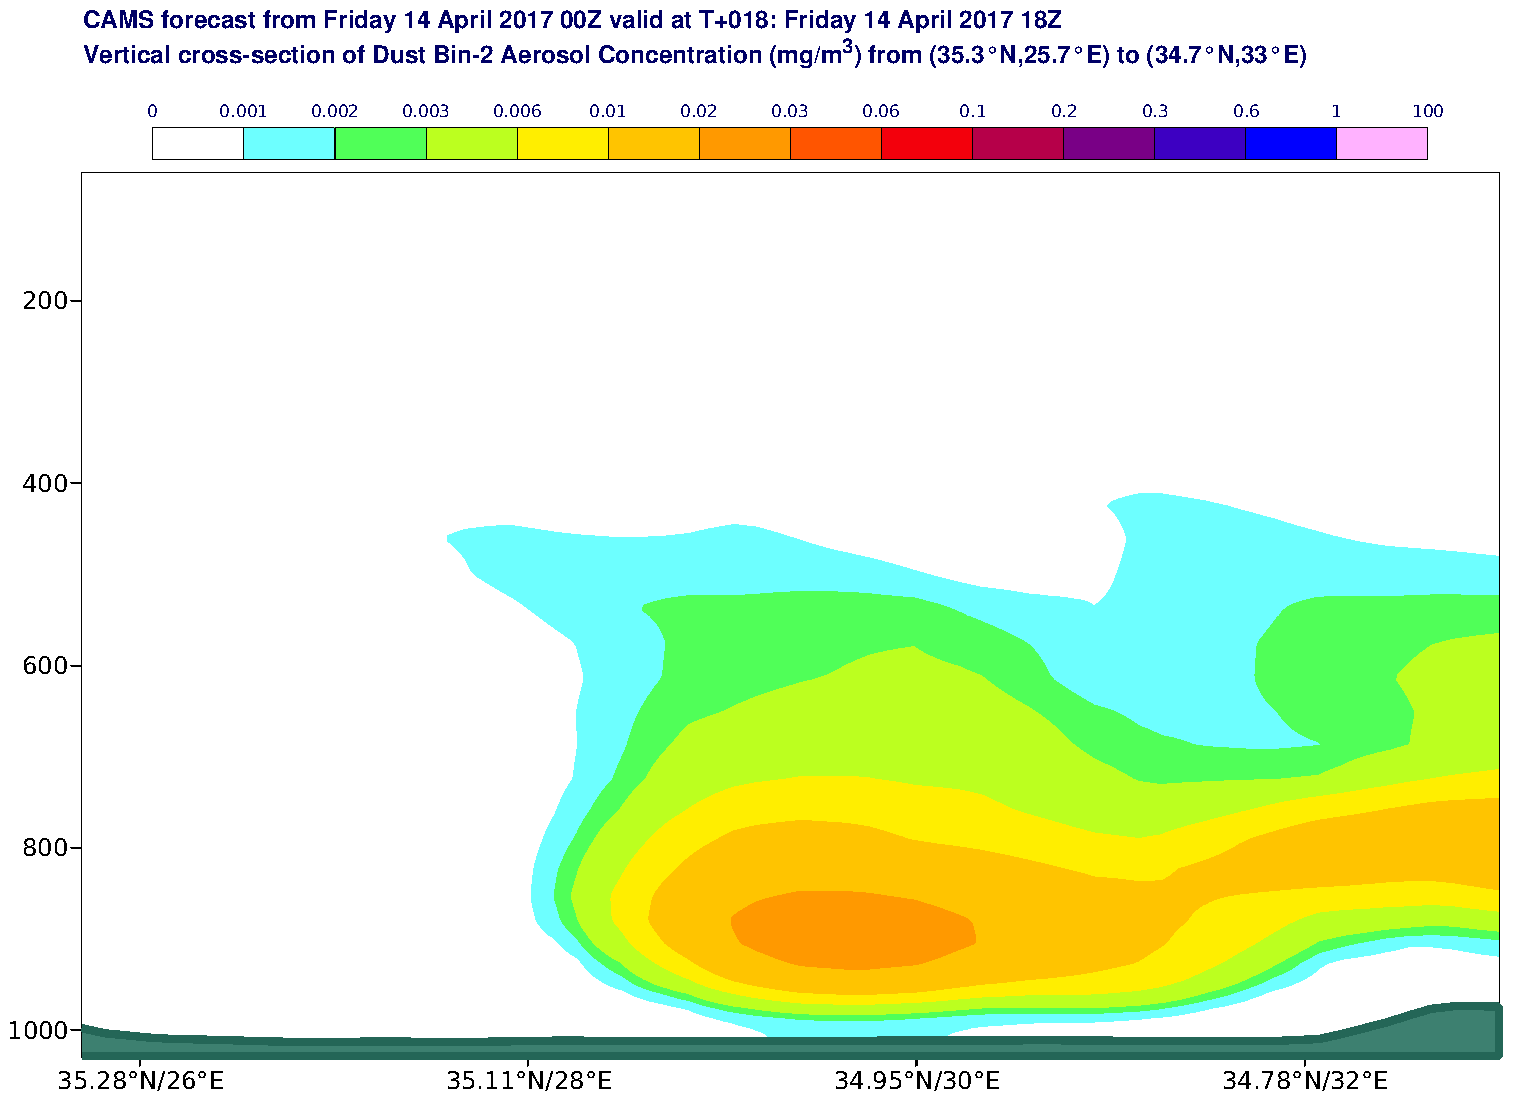 Vertical cross-section of Dust Bin-2 Aerosol Concentration (mg/m3) valid at T18 - 2017-04-14 18:00